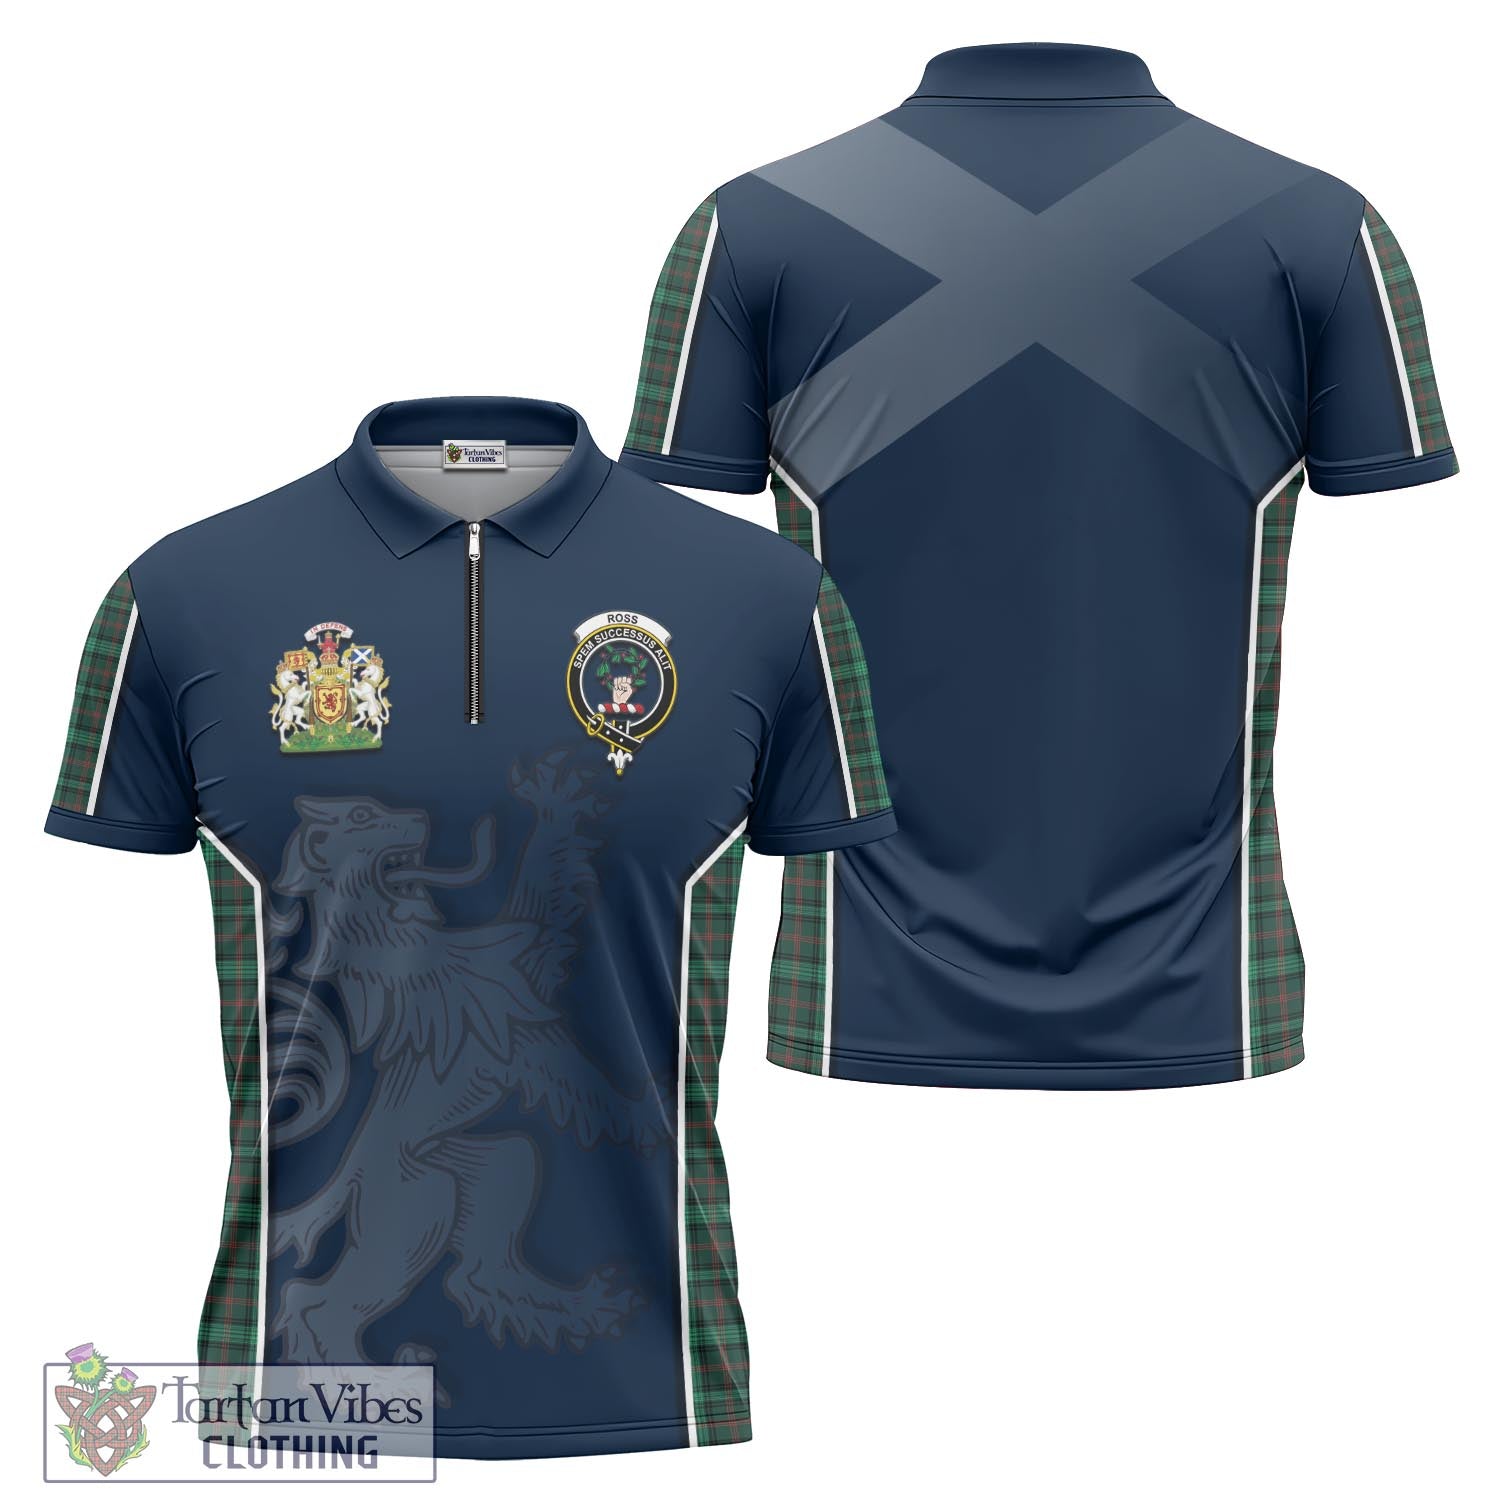 Tartan Vibes Clothing Ross Hunting Modern Tartan Zipper Polo Shirt with Family Crest and Lion Rampant Vibes Sport Style